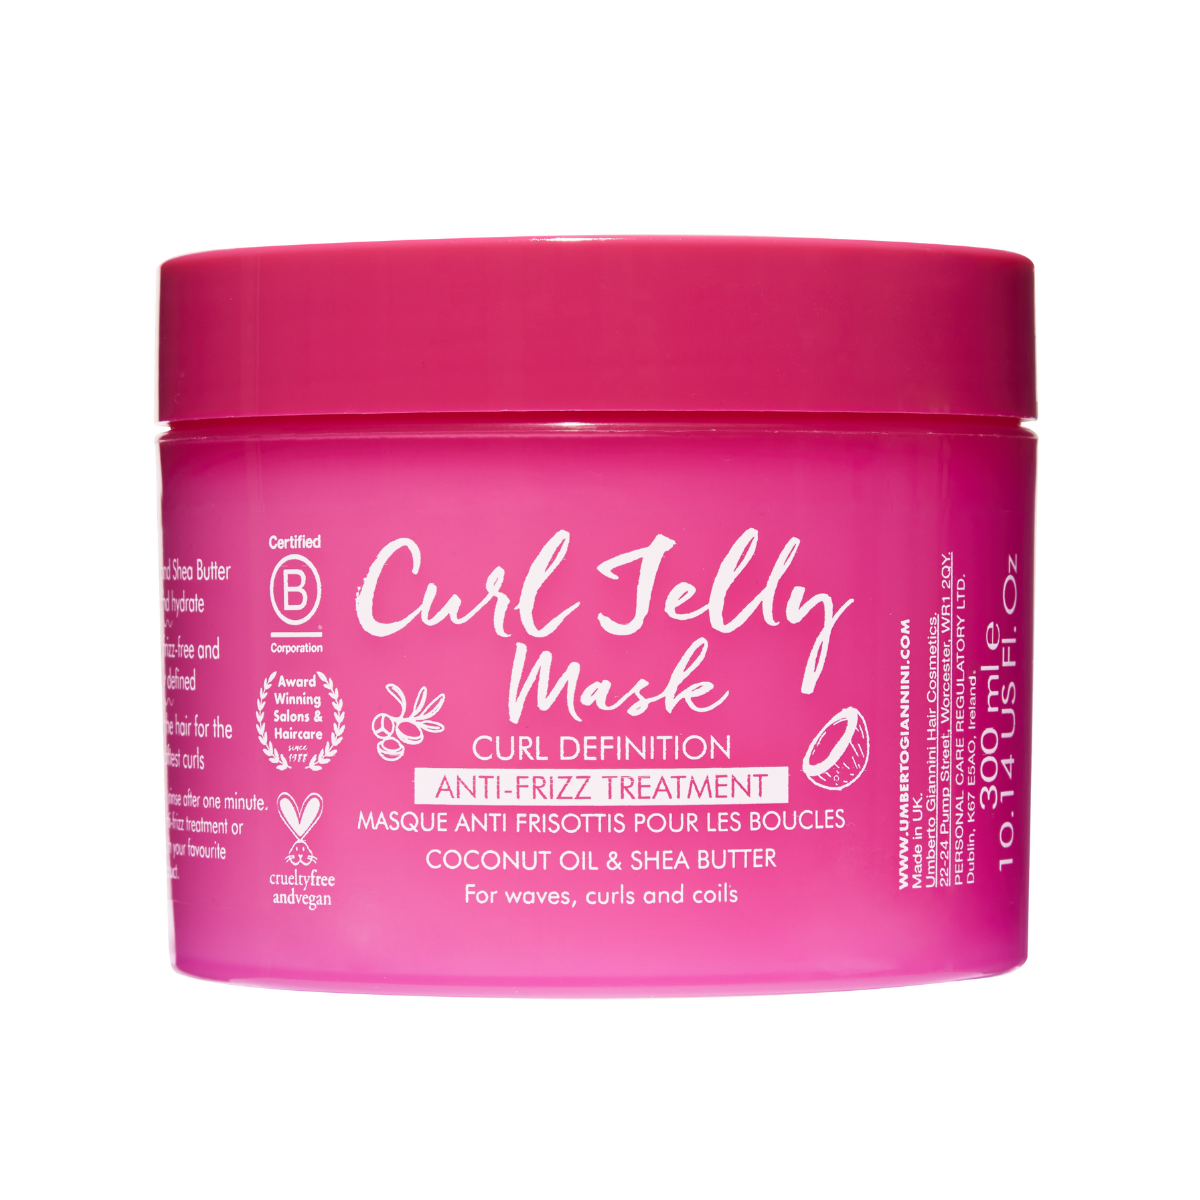 Curl Jelly Mask Supersized